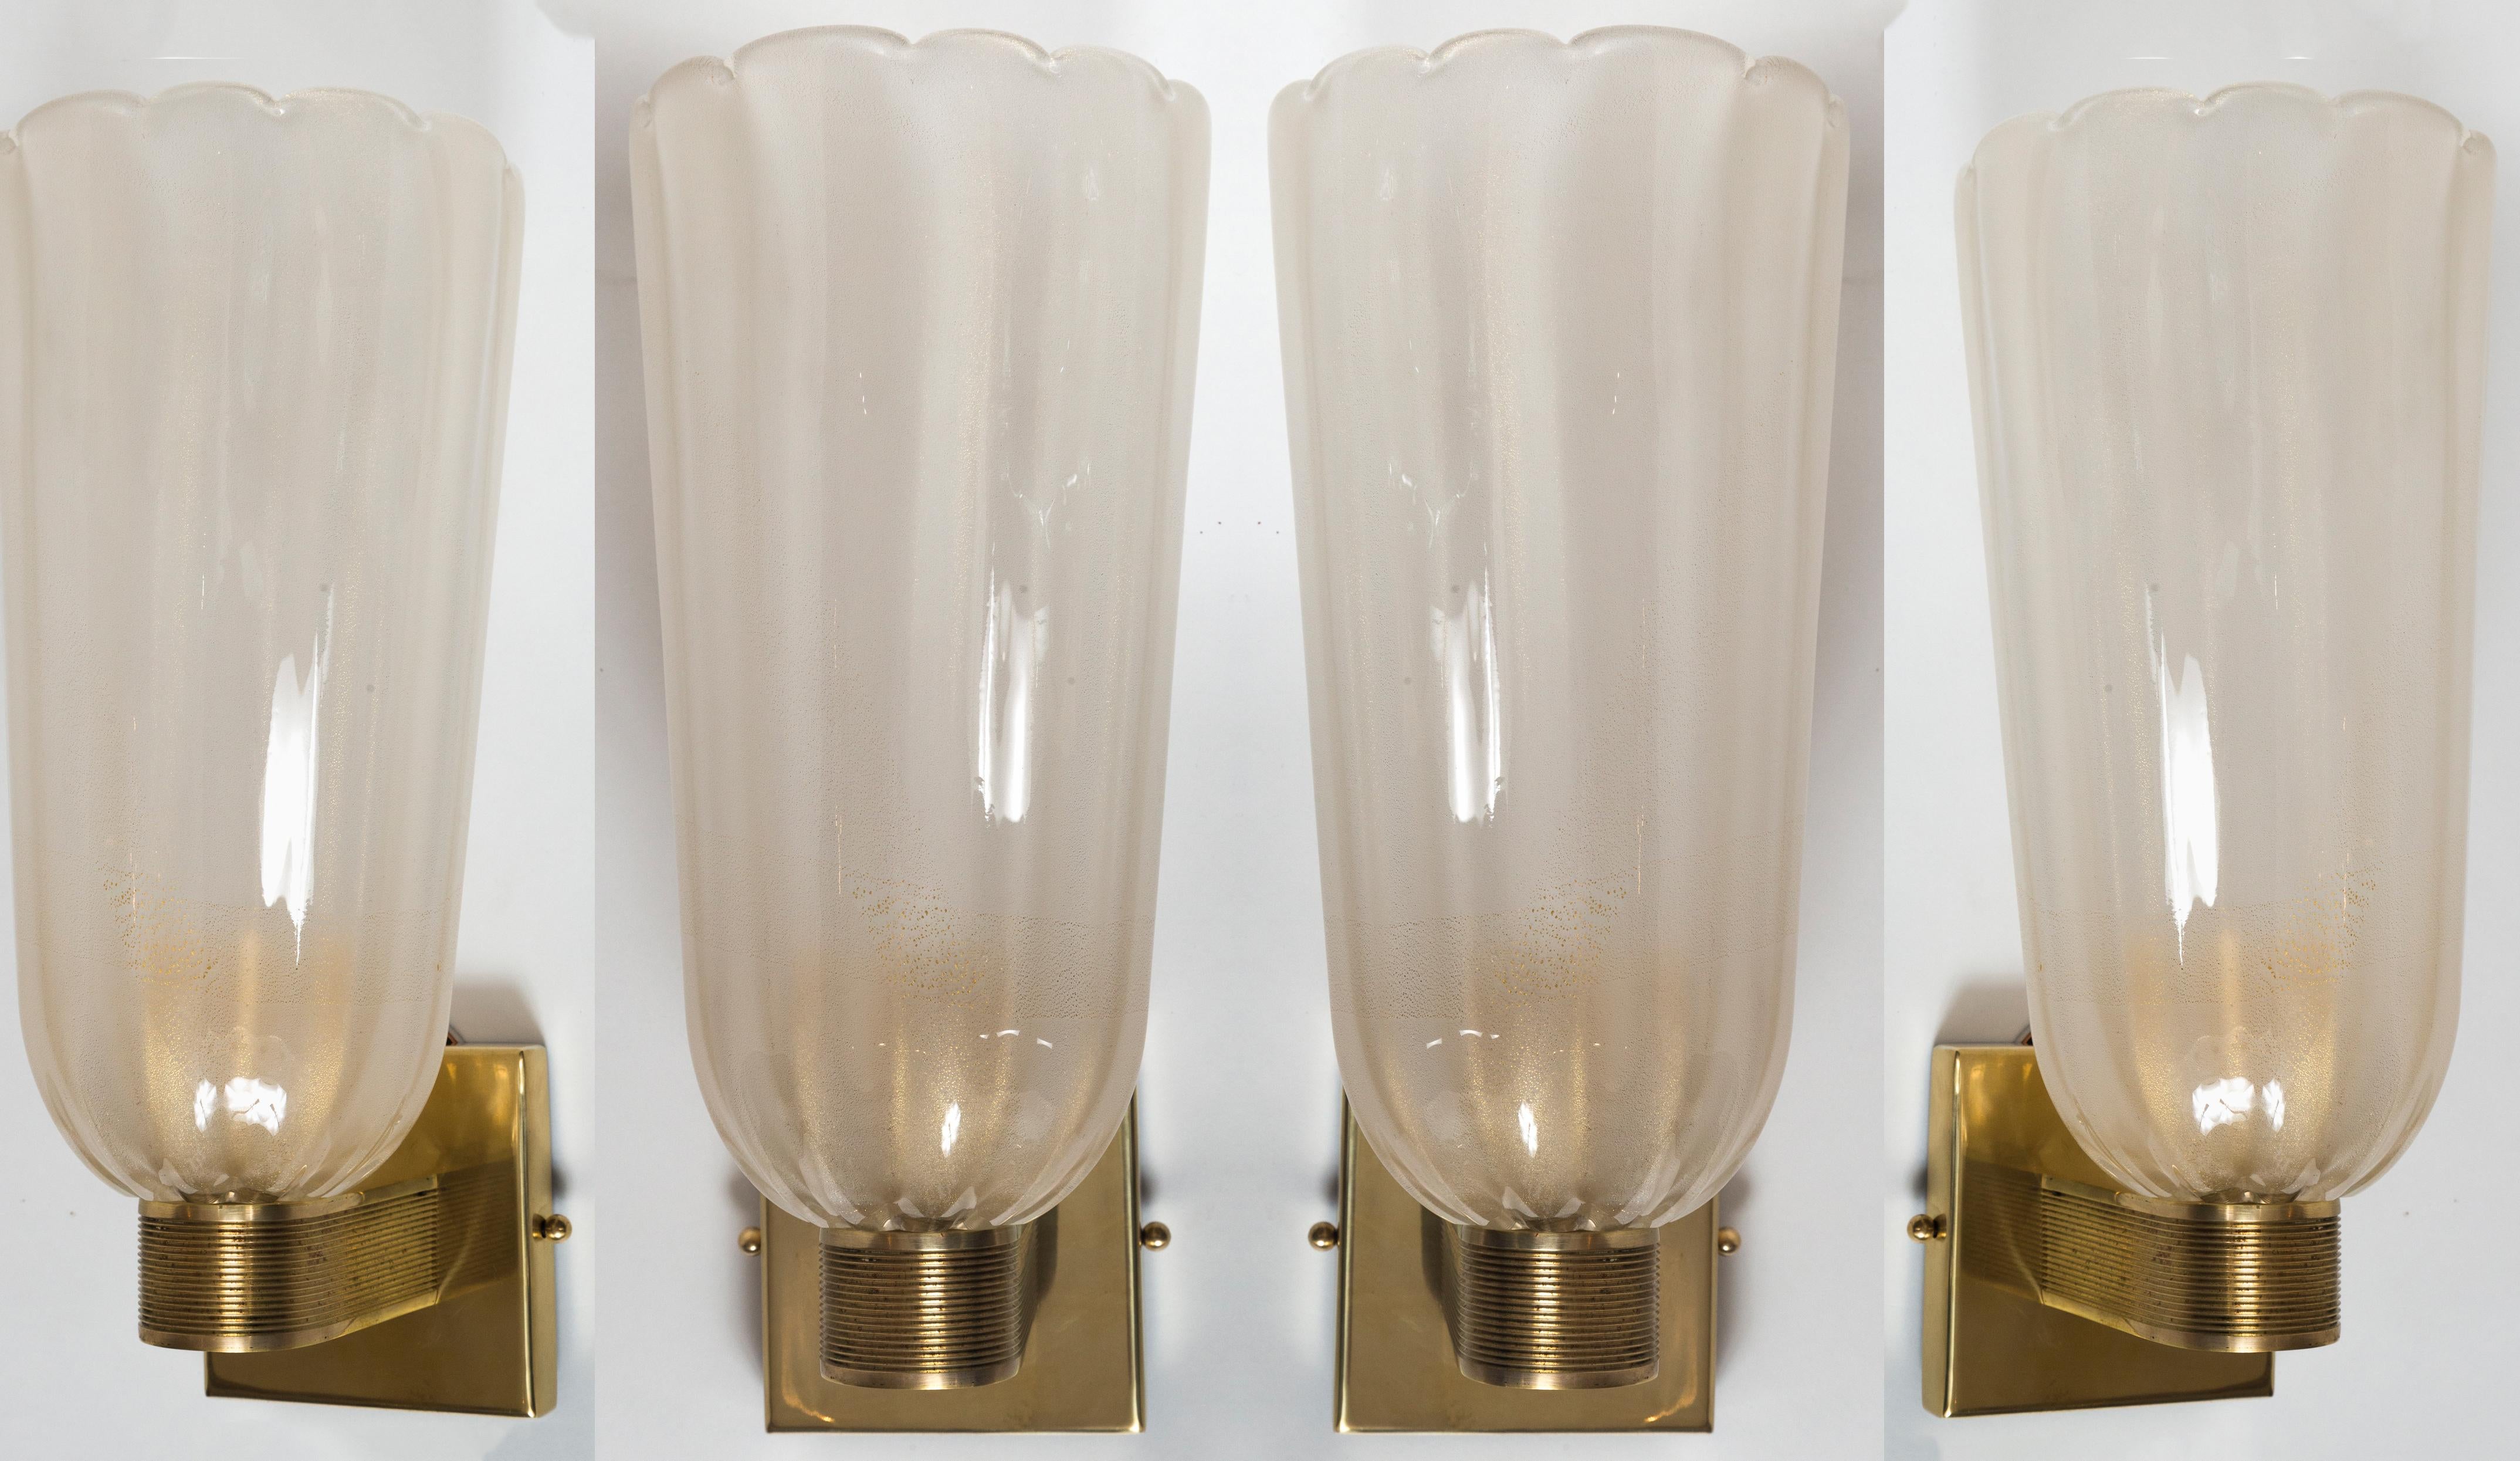 An elegant pair of modernized Art Deco style mouth blown wall lights composed of tall and lightly scalloped lattimo gold cups upheld by sleek unlacquered brass arms.

Wired with porcelain E26 , install ready with 5? x 5? back plate and UL